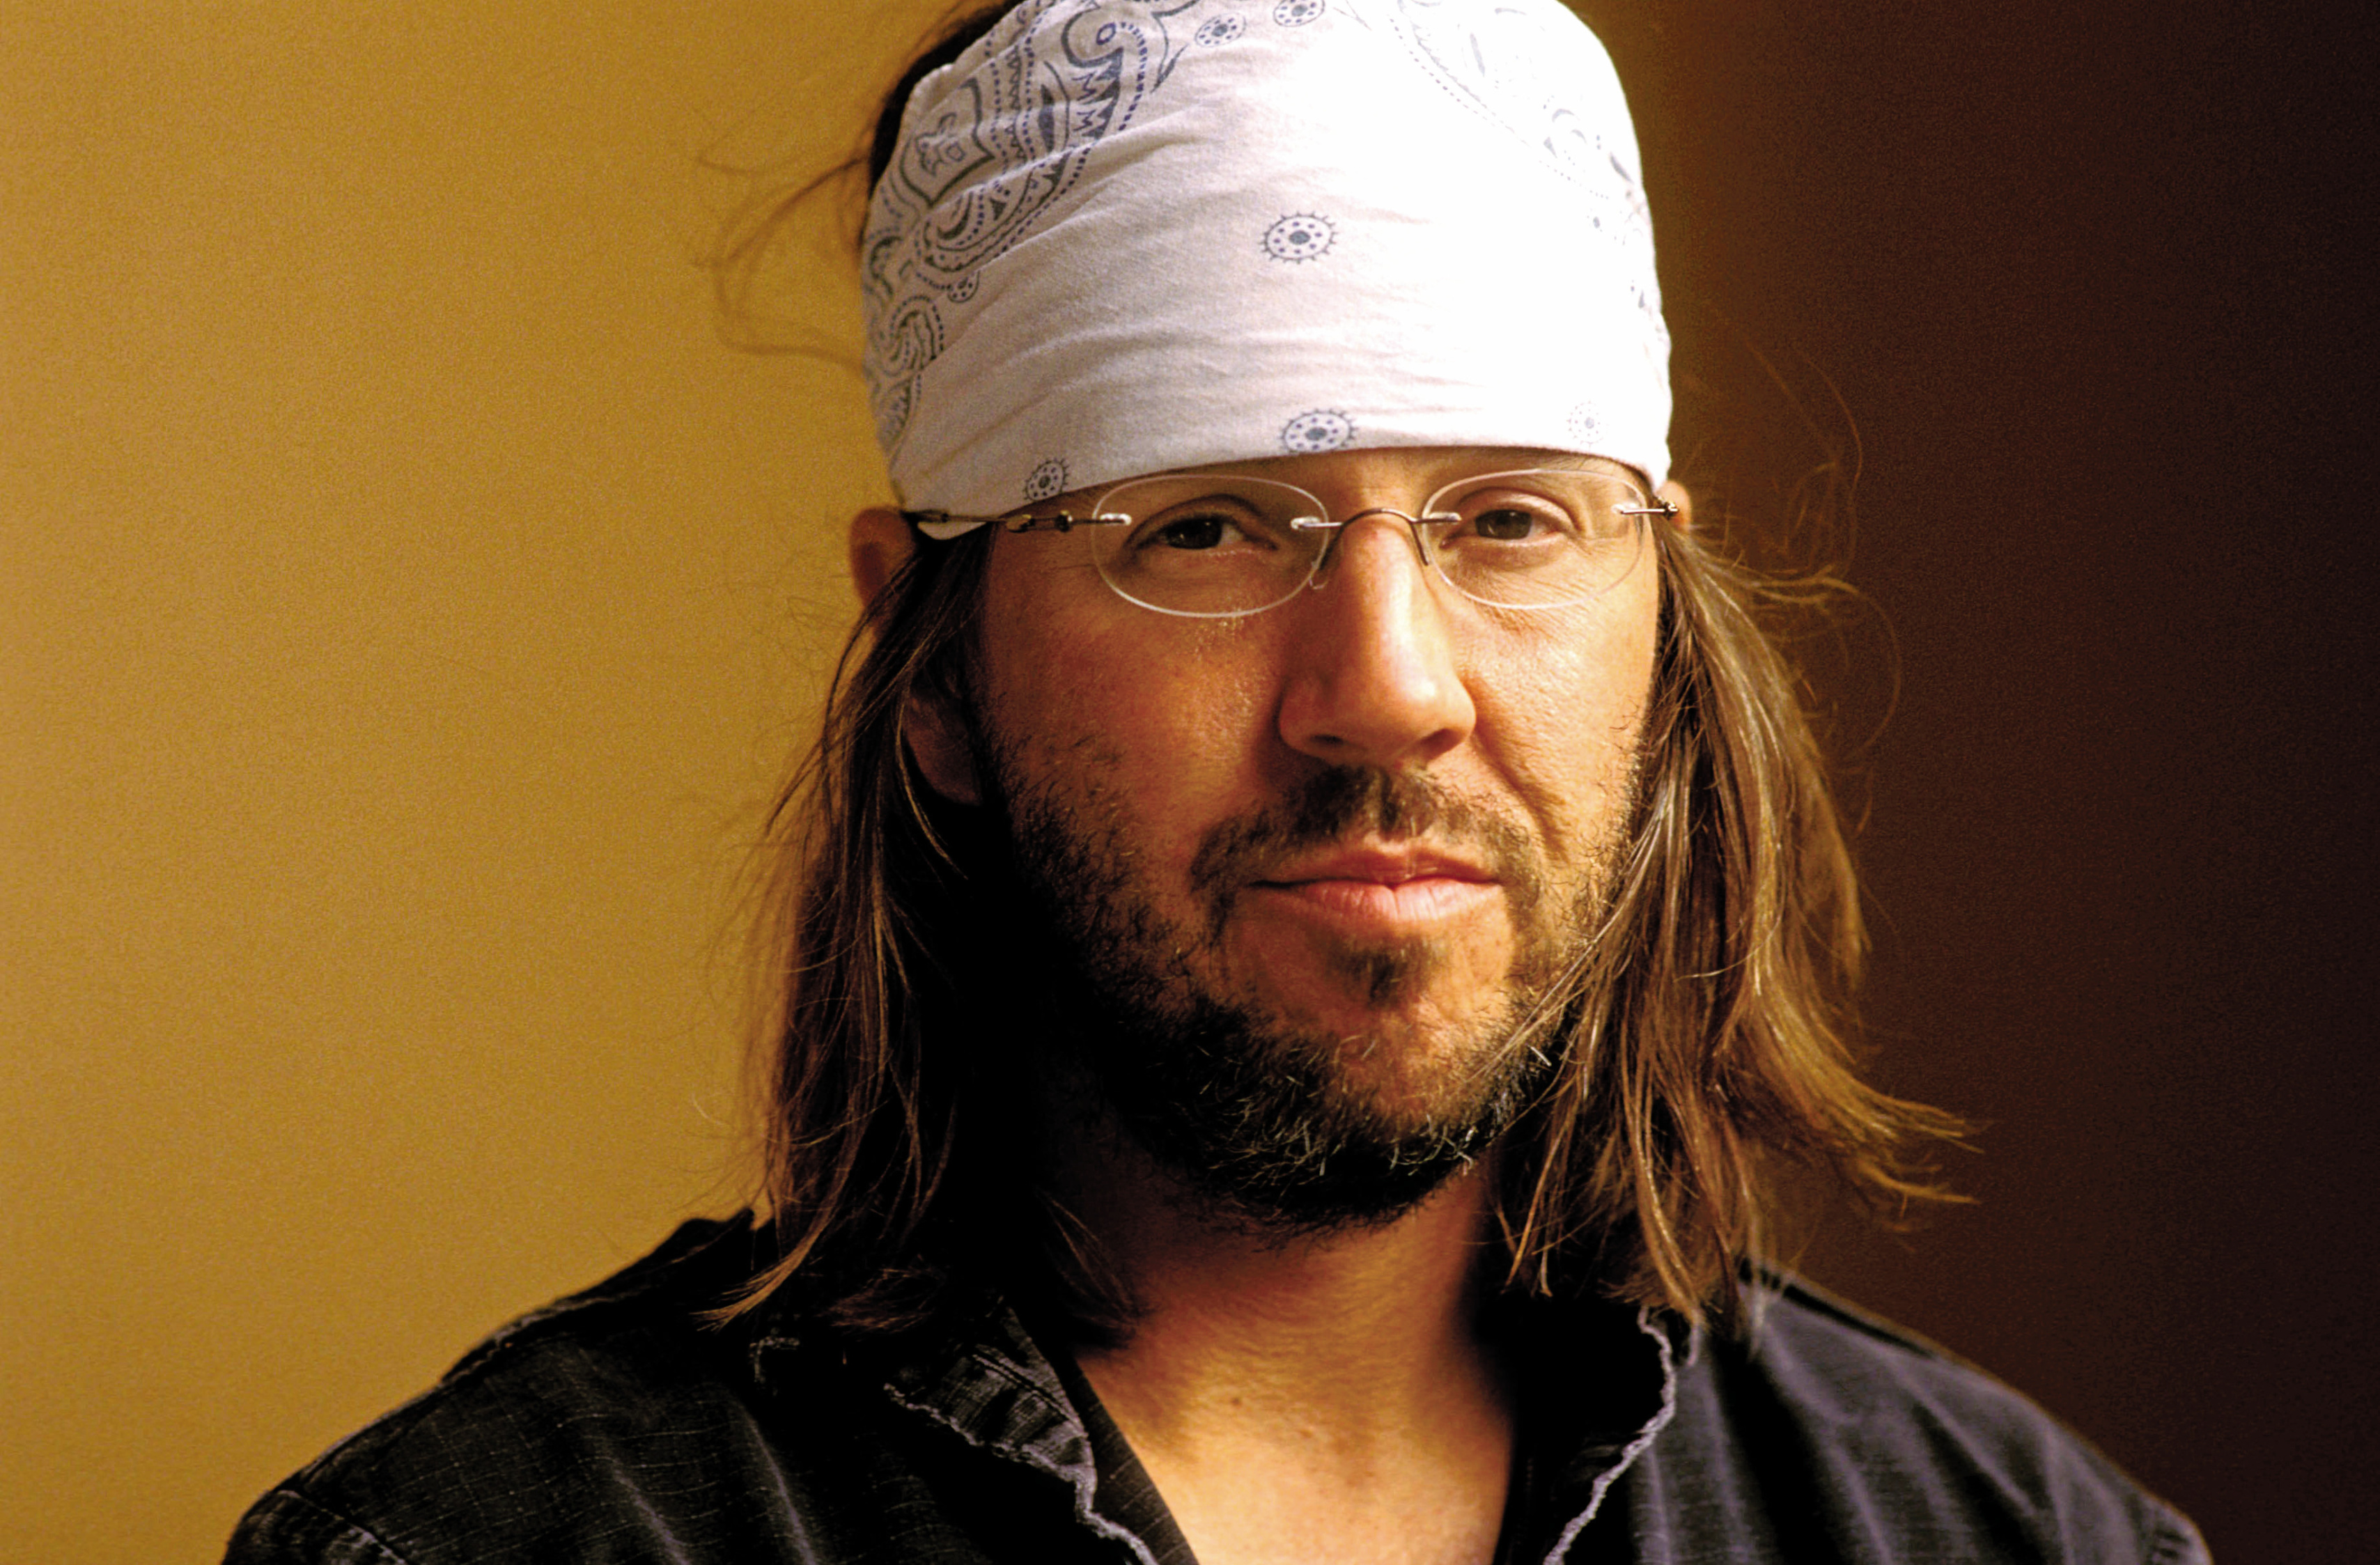 oblivion david foster wallace review